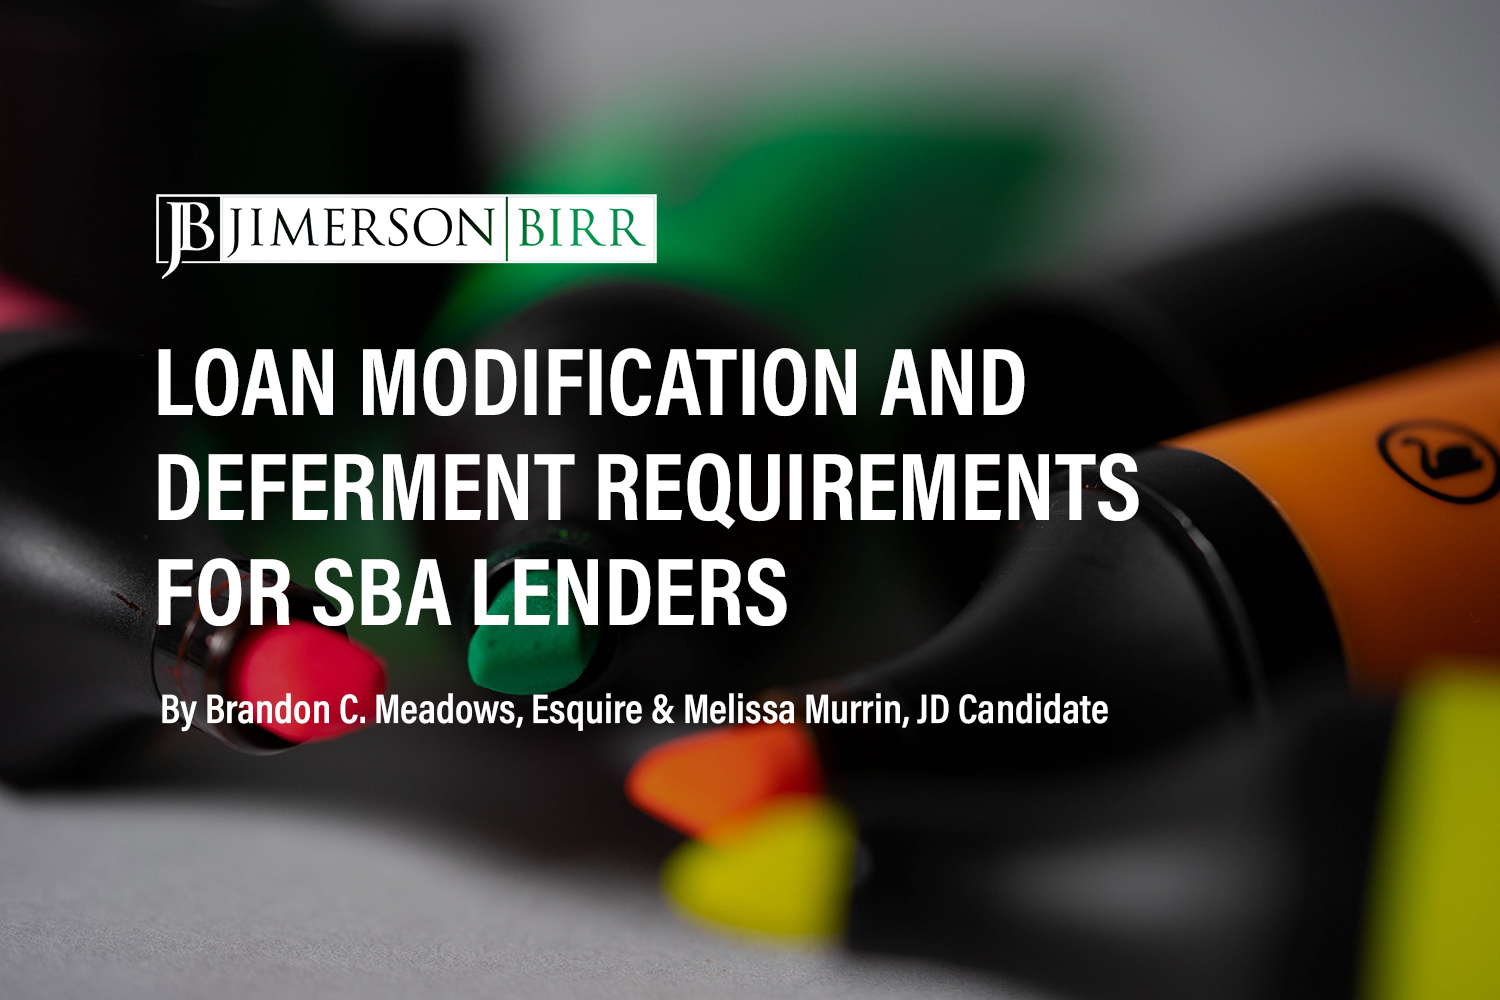 Loan Modification and Deferment Requirements for SBA Lenders